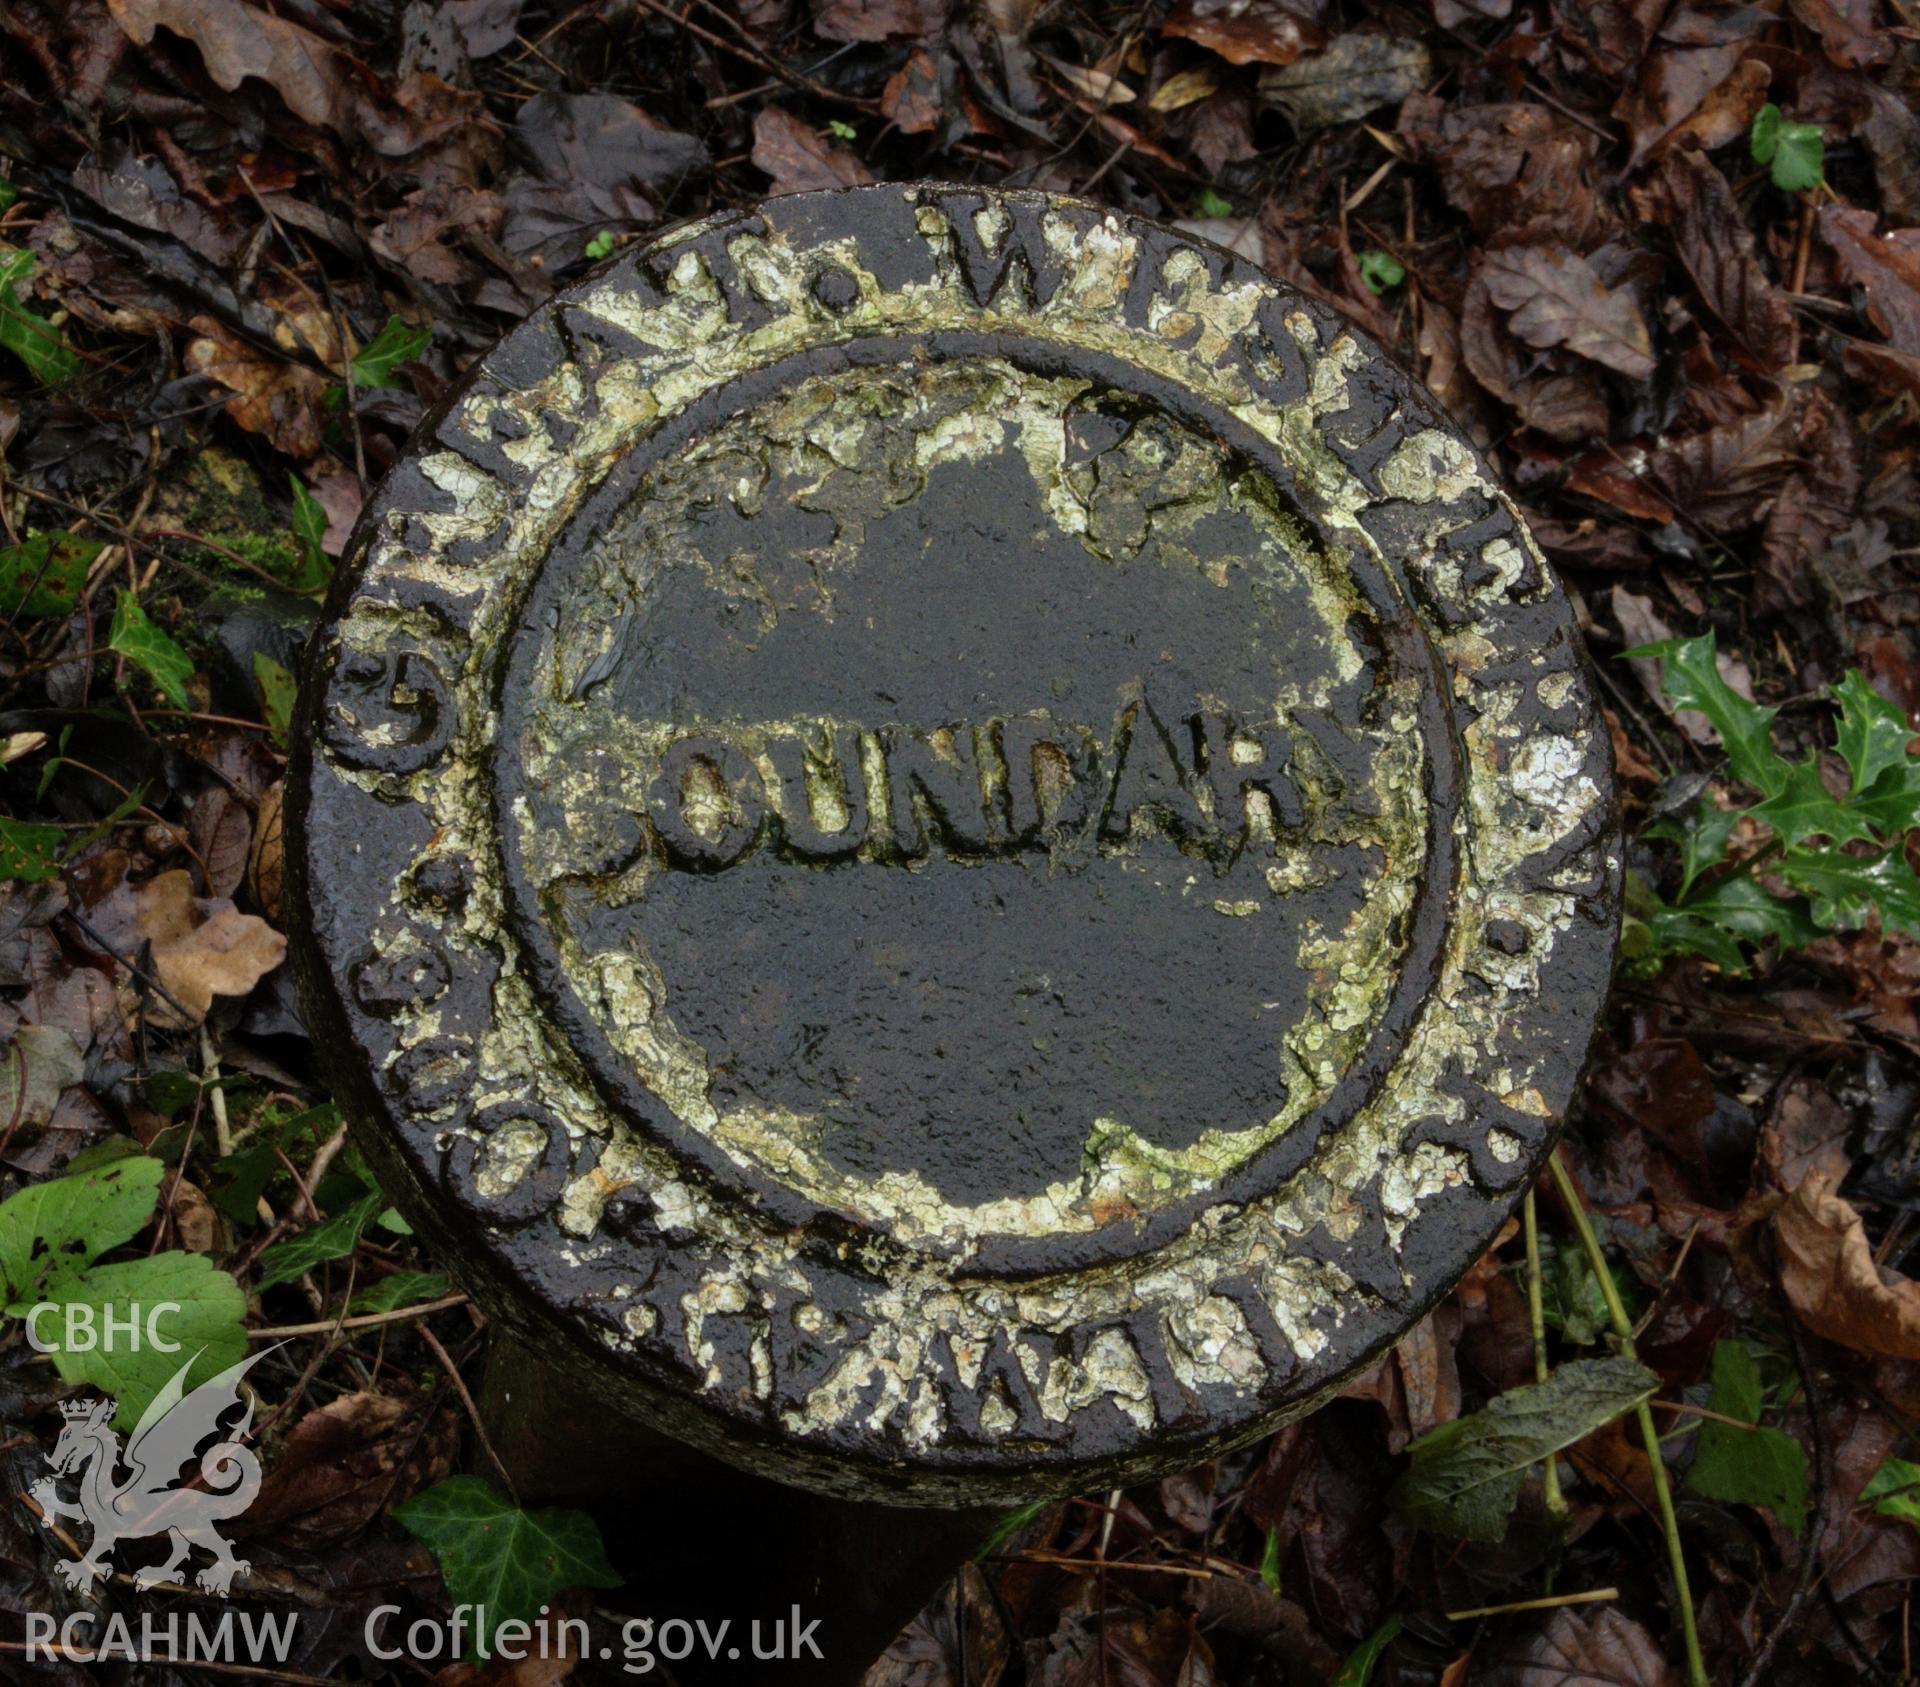 Colour photo showing one of the northern boundary markers, taken by Mark Evans, January 2017.